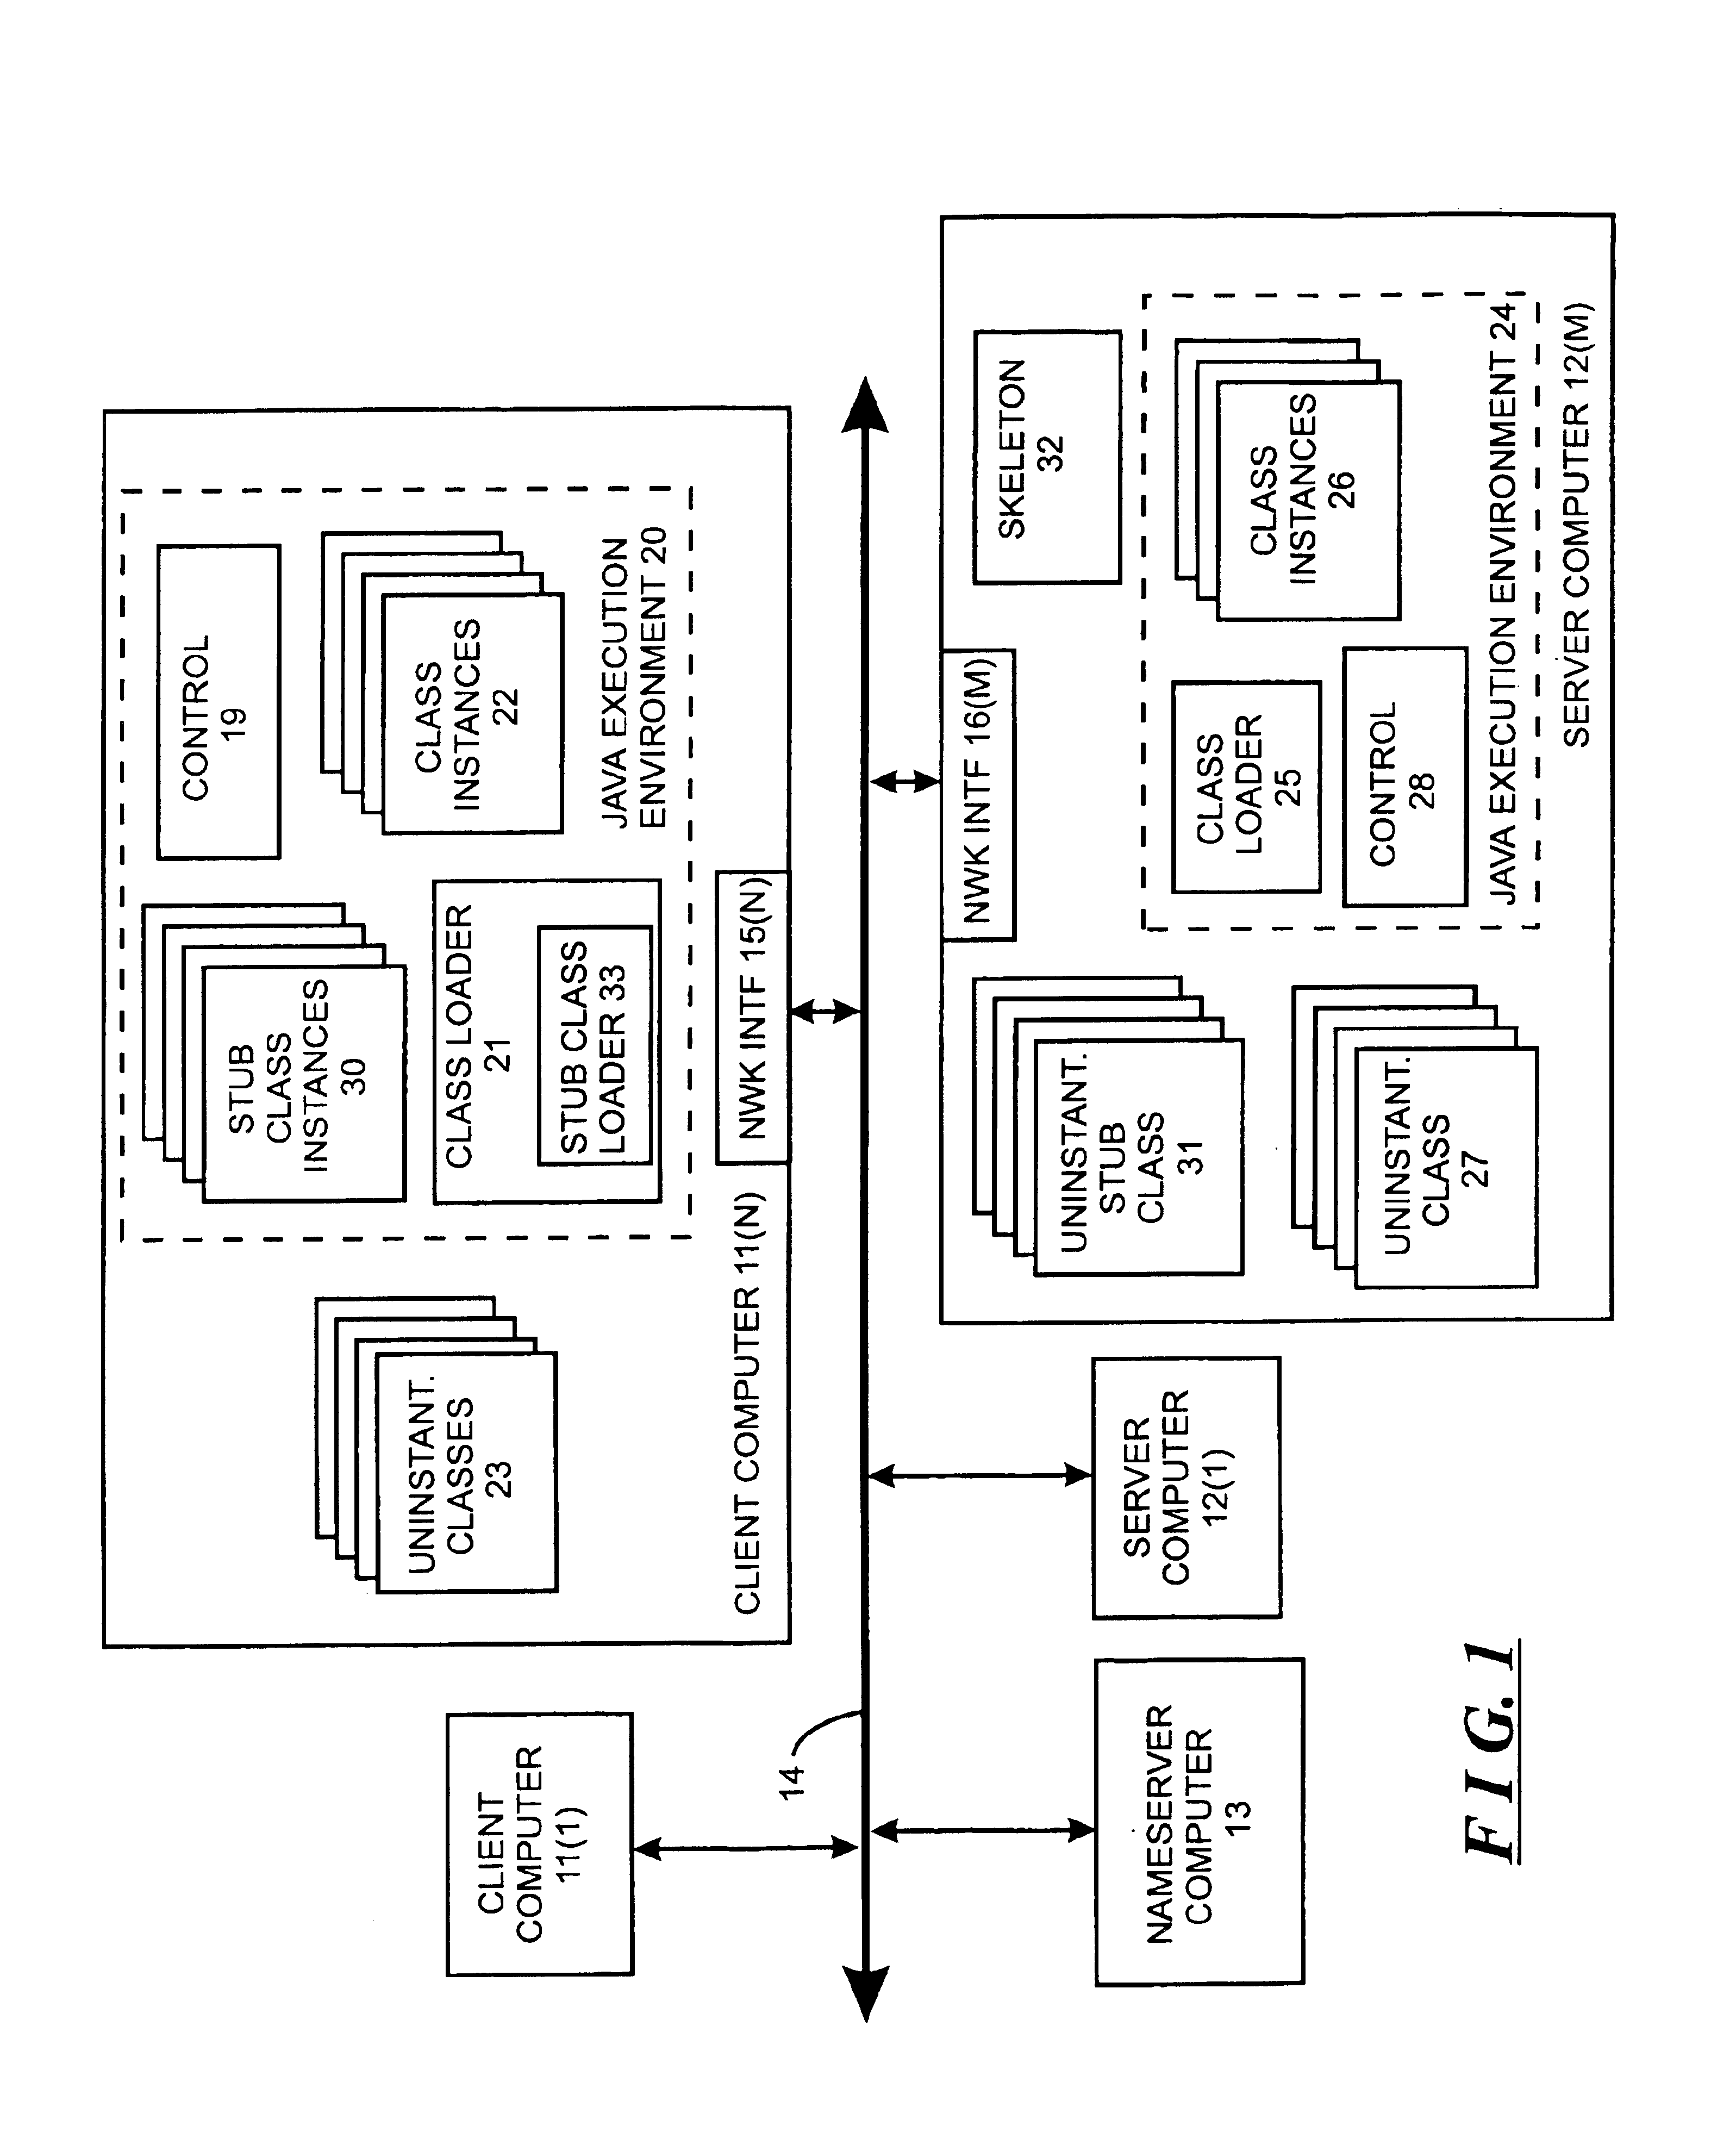 System and method for facilitating dynamic loading of "stub" information to enable a program operating in one address space to invoke processing of a remote method or procedure in another address space